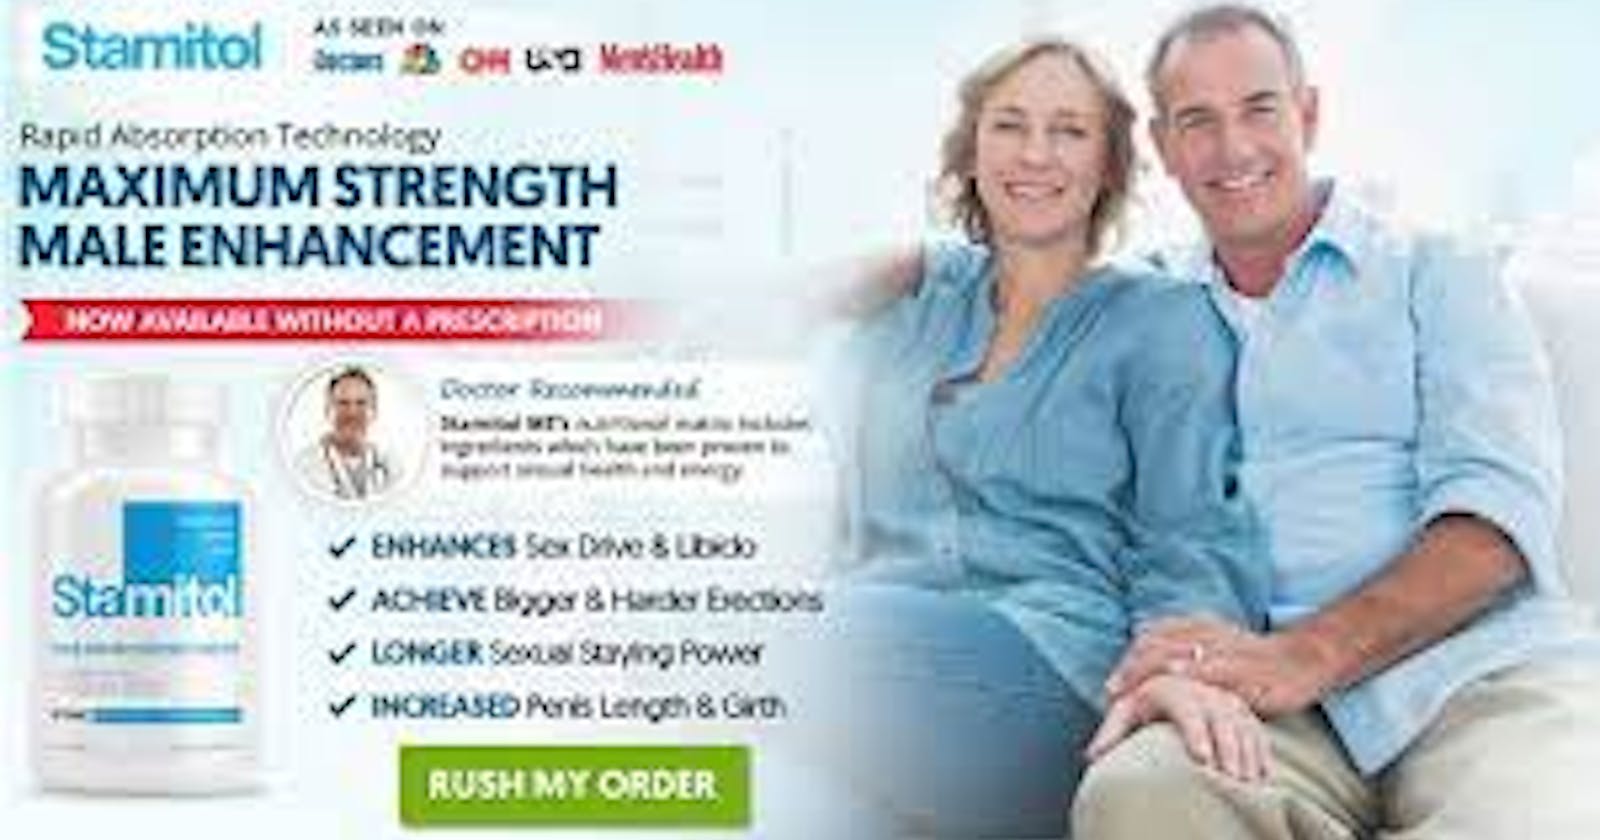 Stamitol Male Enhancement Reviews For Official Website?